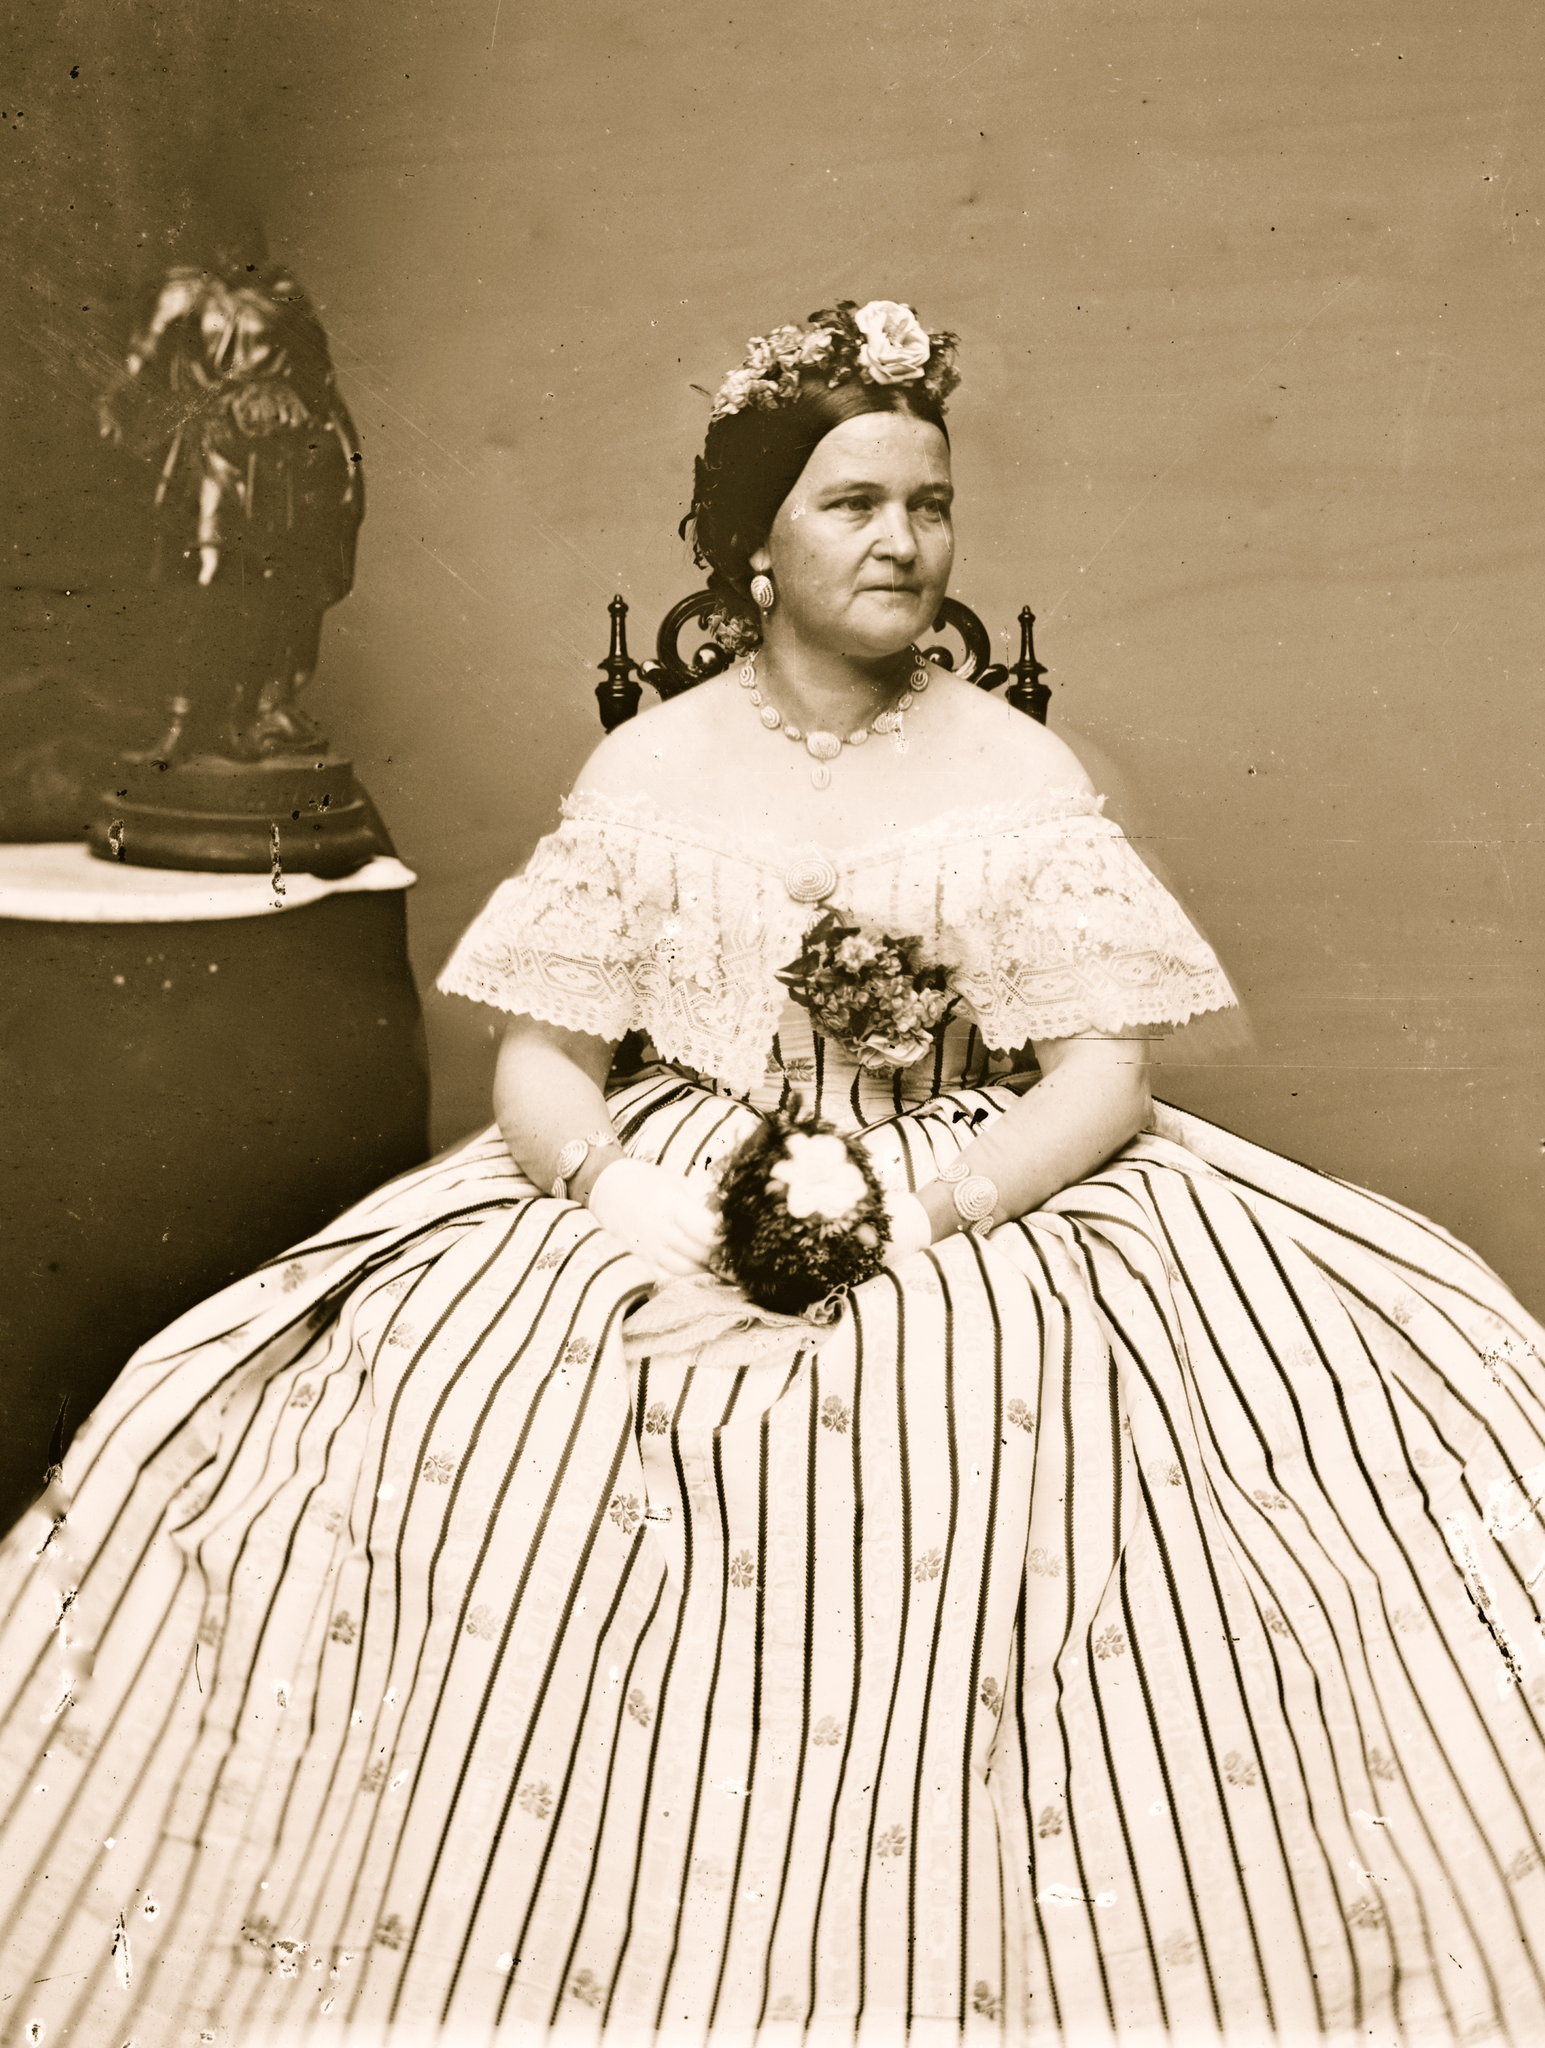 Sepia image of Mary Todd Lincoln in a dress looking off to the right. She is dressed in white.